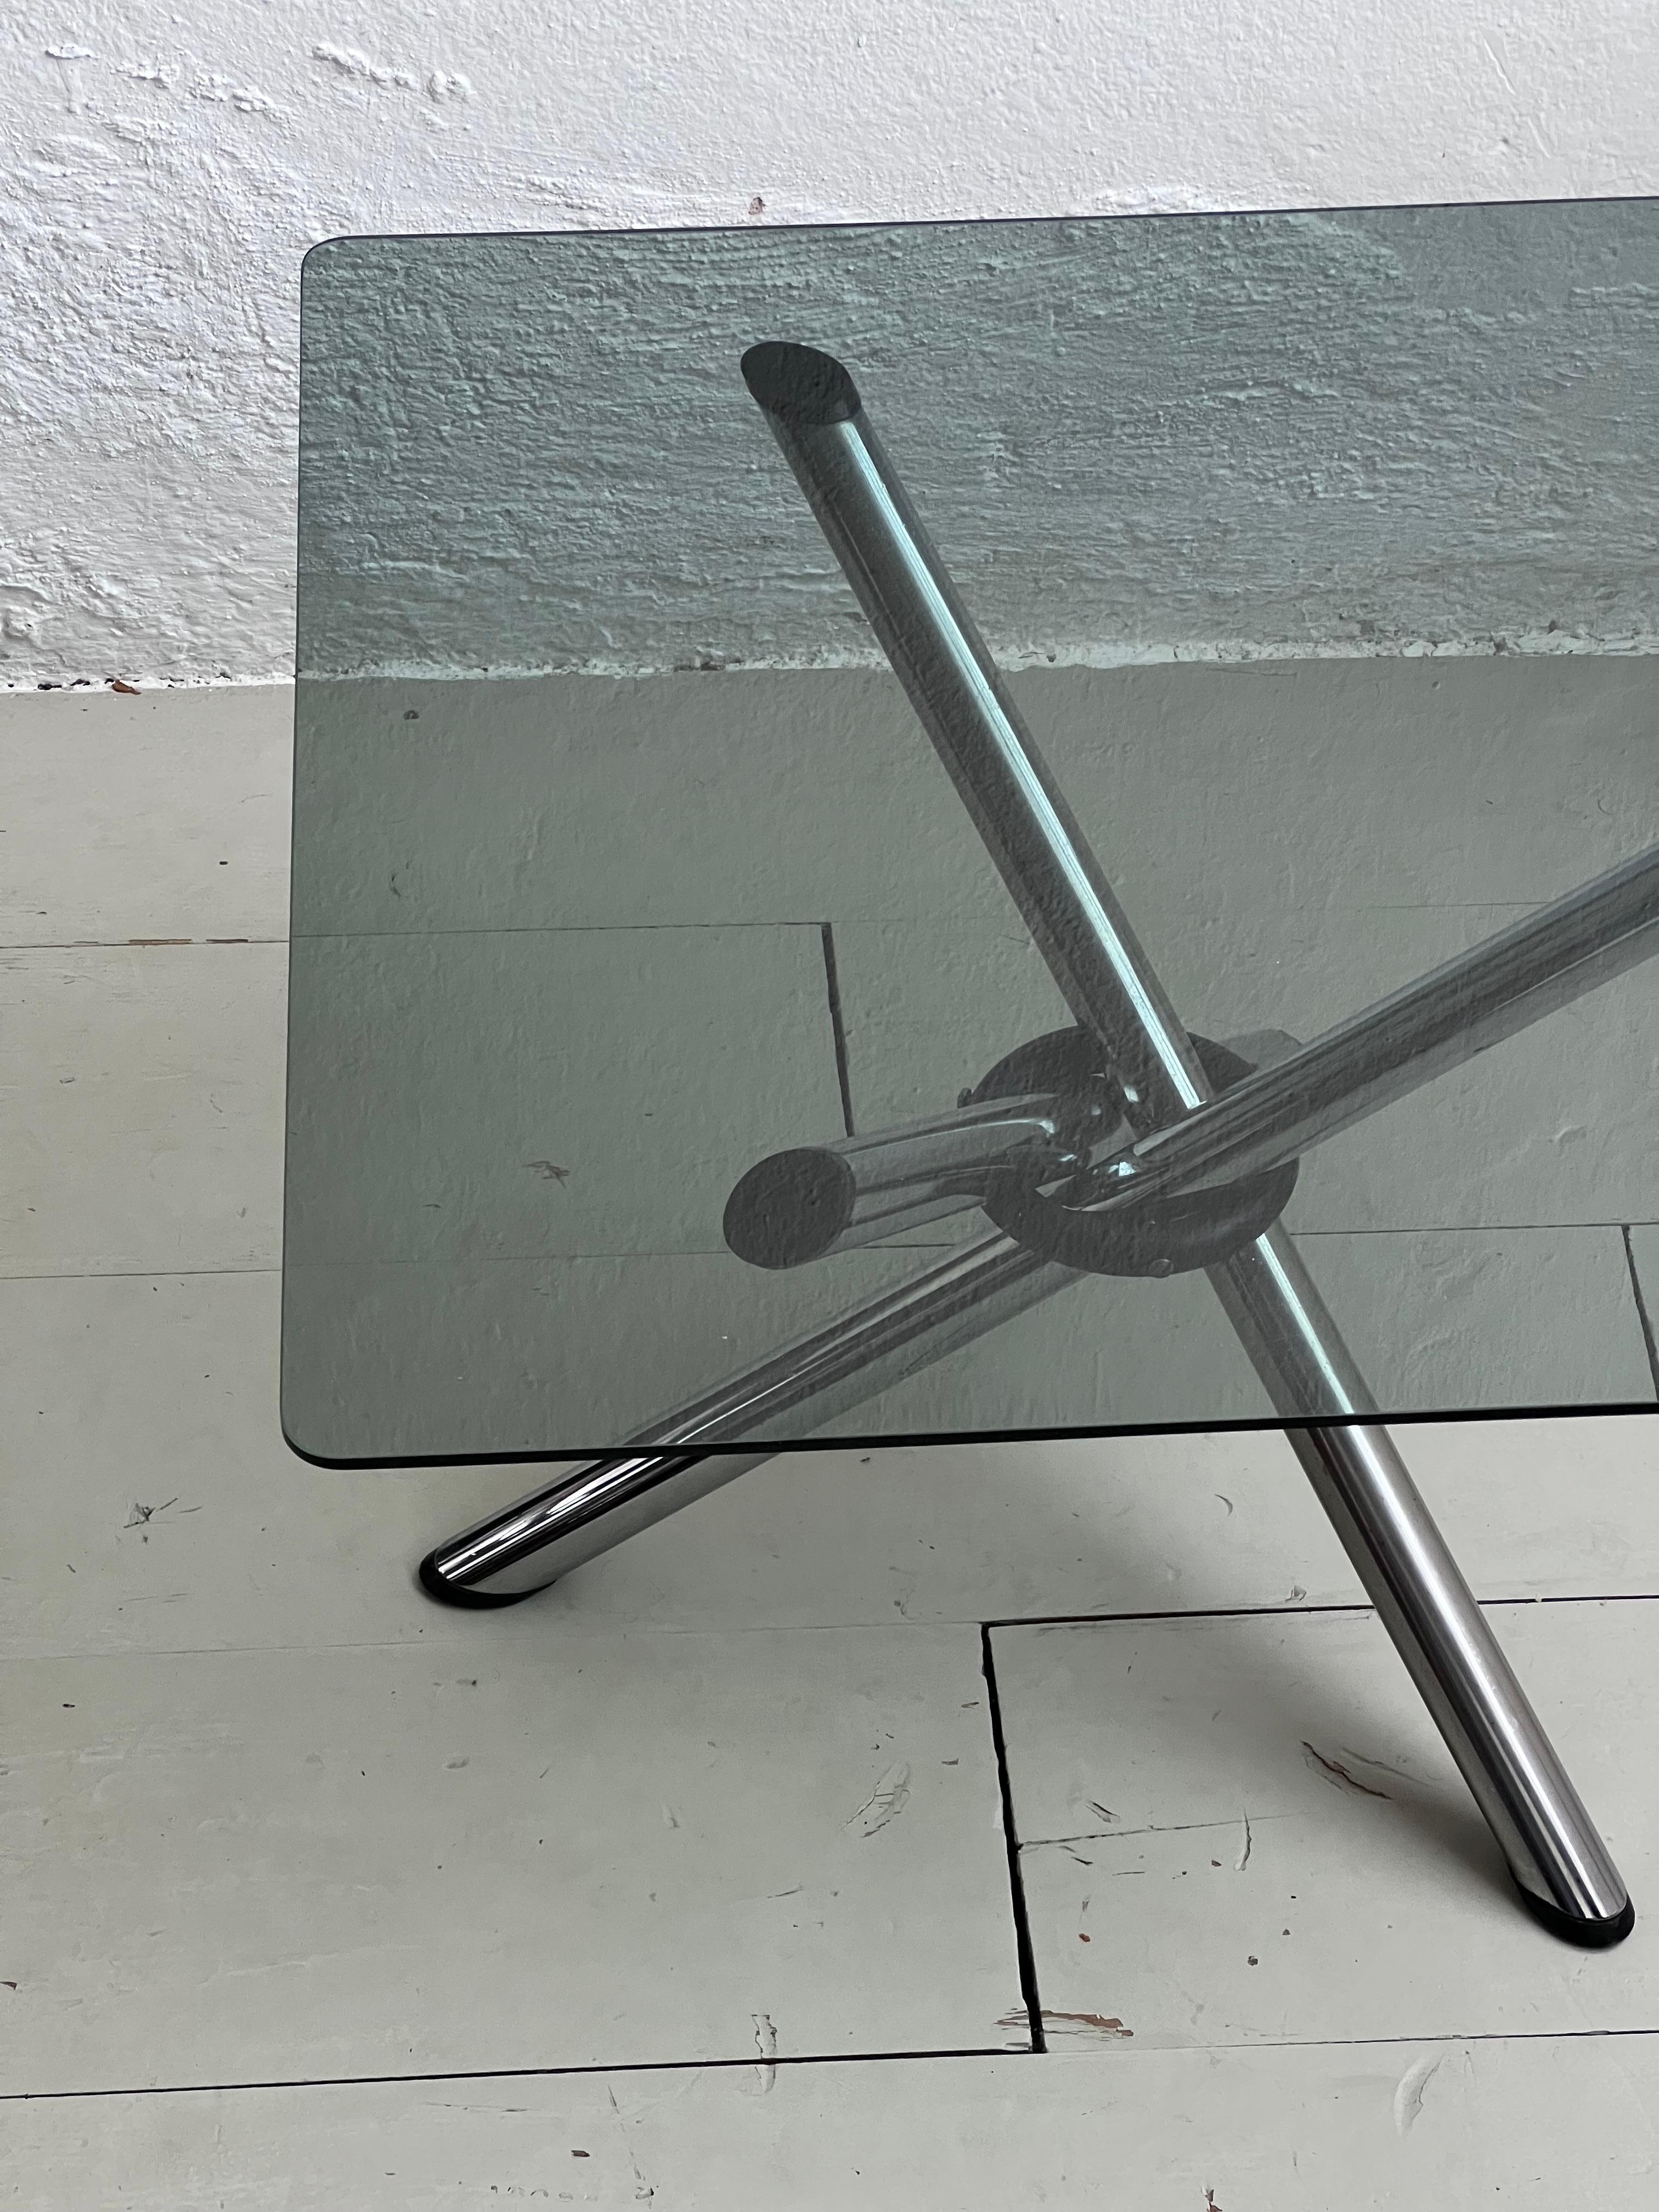 Vintage coffee table - Italian collectible cocktail table - foldable low table

A vintage 1970s coffee/cocktail table with three tubular legs in chromed metal and a square smoked glass top with rounded corners. Minimal in design and wise in